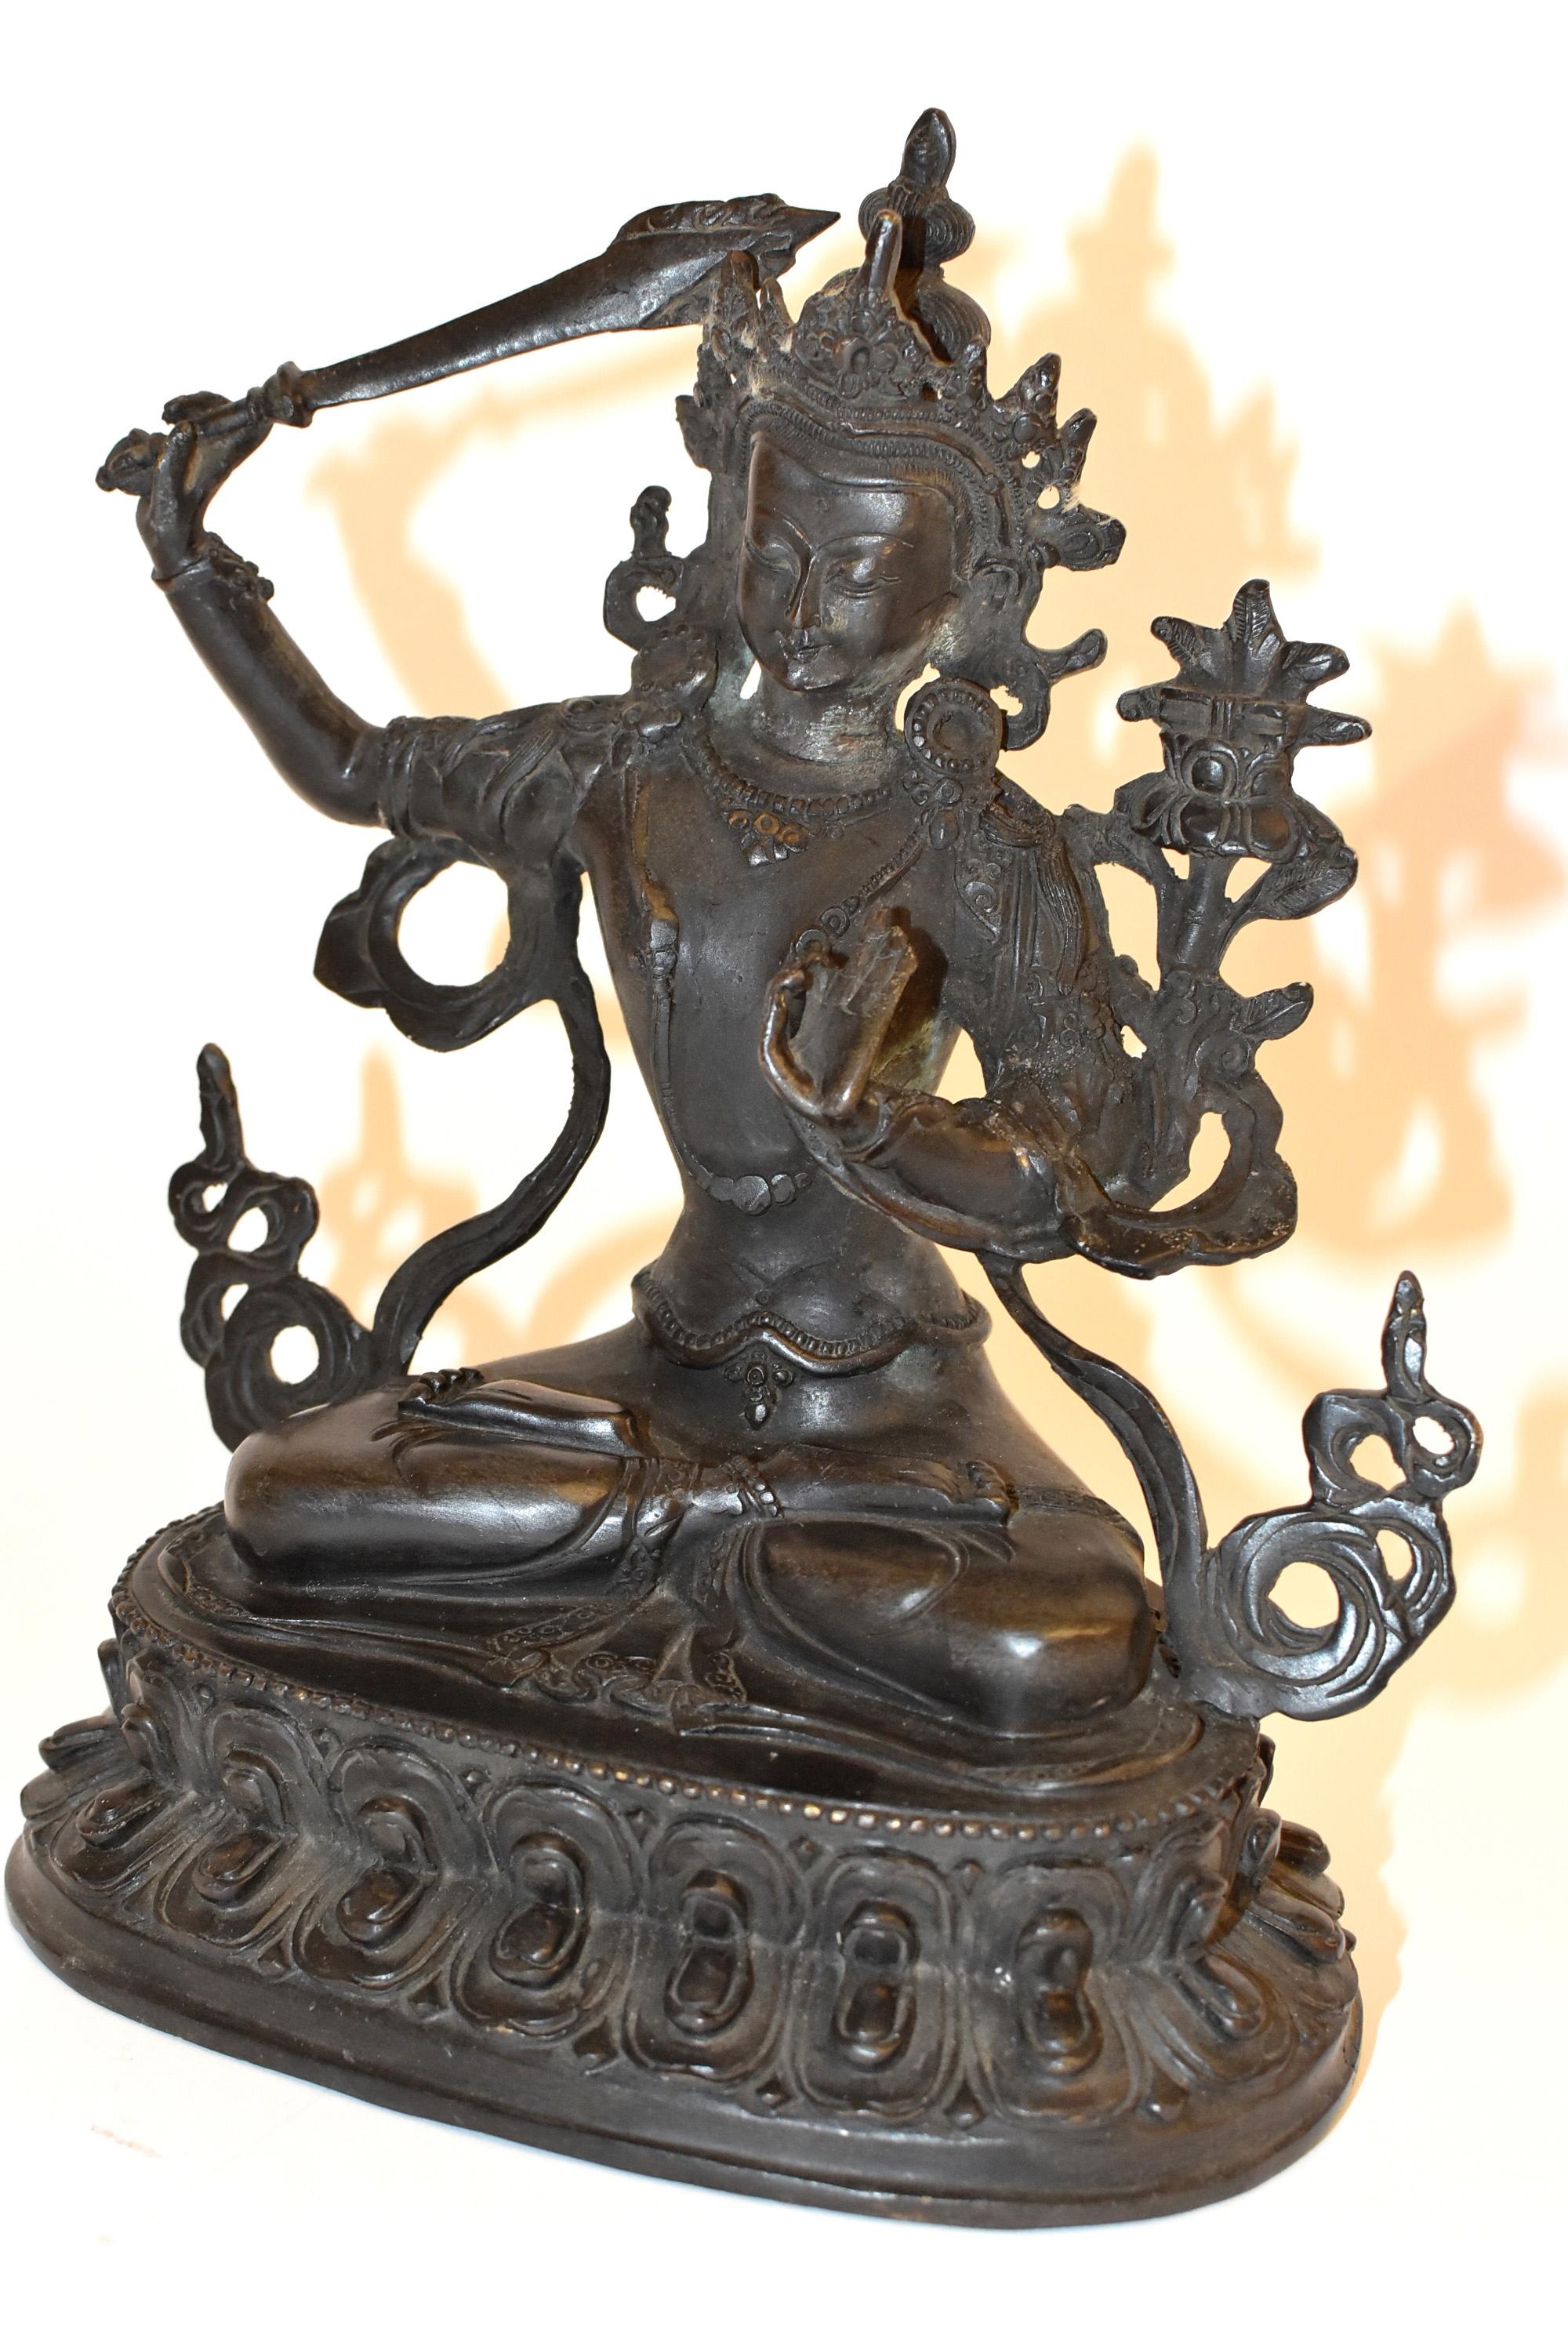 A wonderful statue of Tibetan Bodhisattva Manjushree. Legend has it that he cuts water with the sword to divide the water resource to irrigate dry valleys. In Tibetan Buddhism, Mañjusri also manifests in a wrathful tantric form that is called